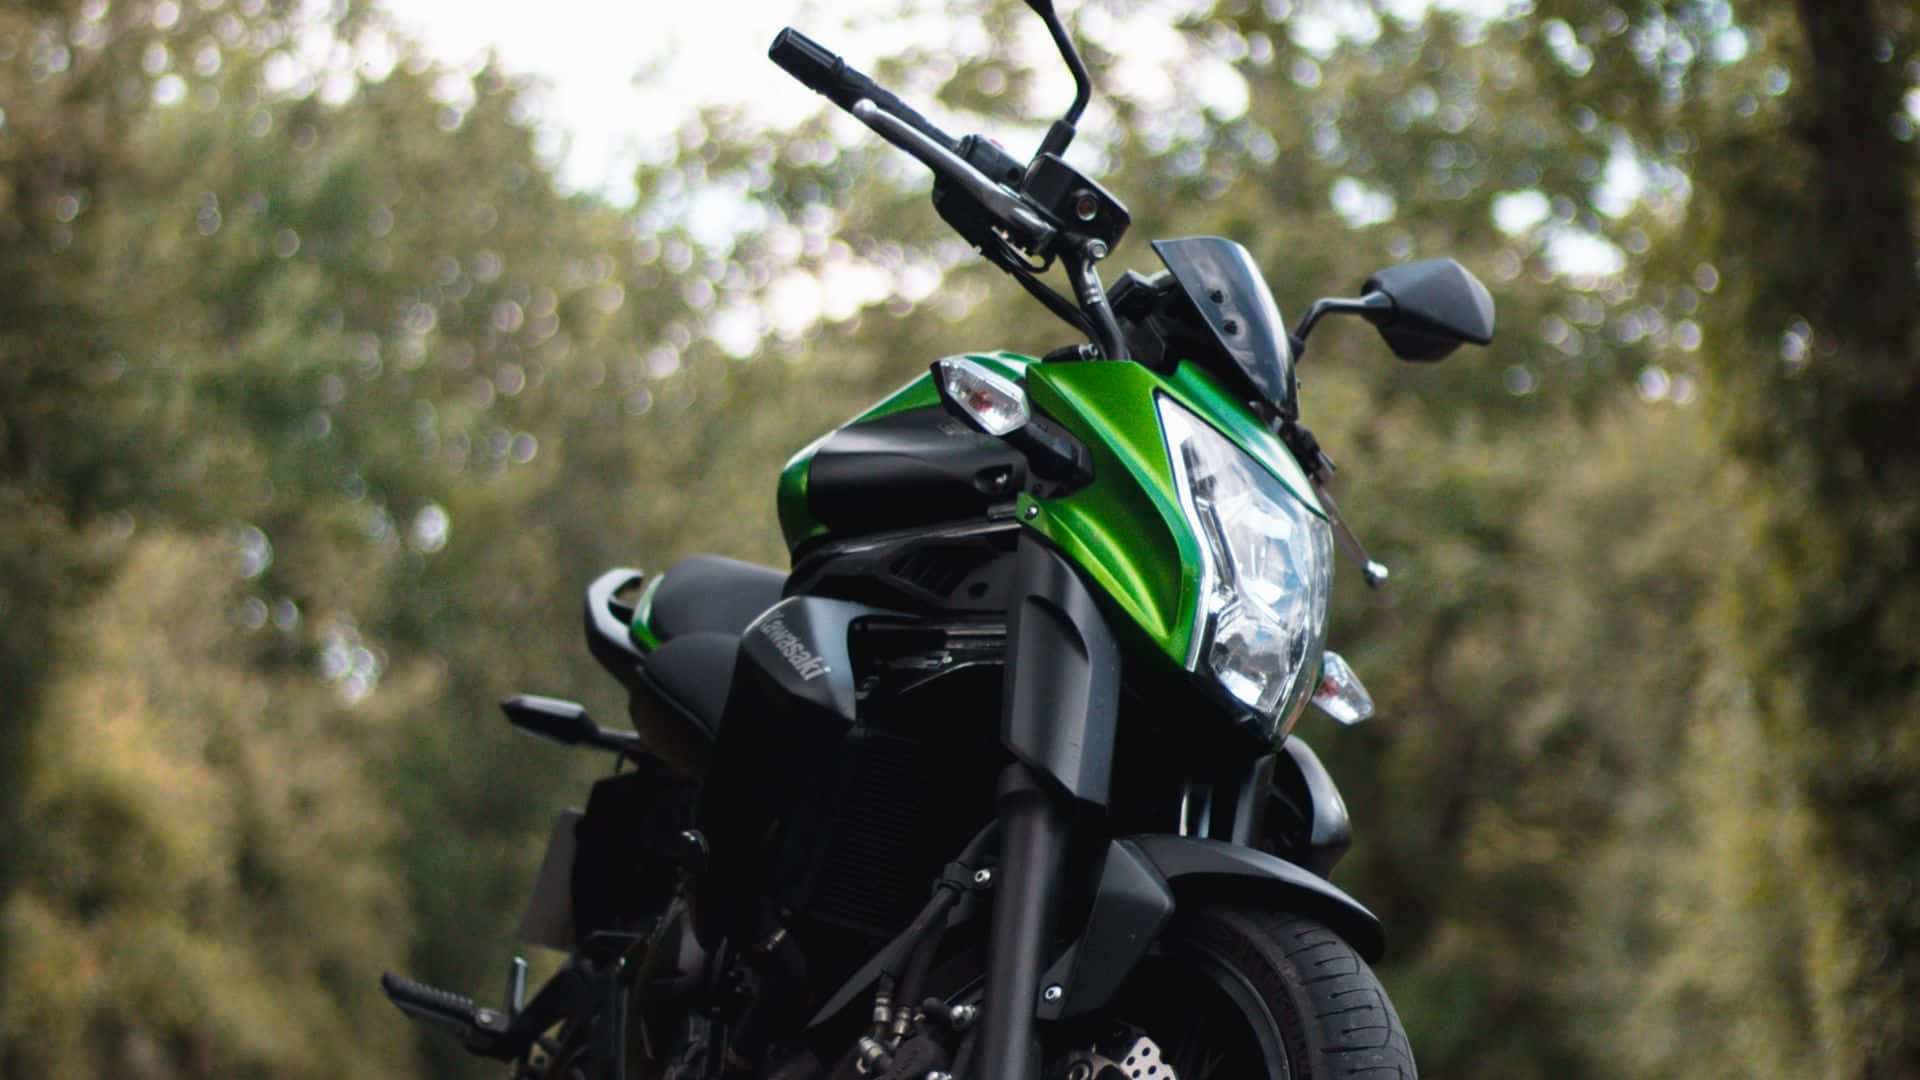 A Green And Black Motorcycle Parked On A Road Wallpaper